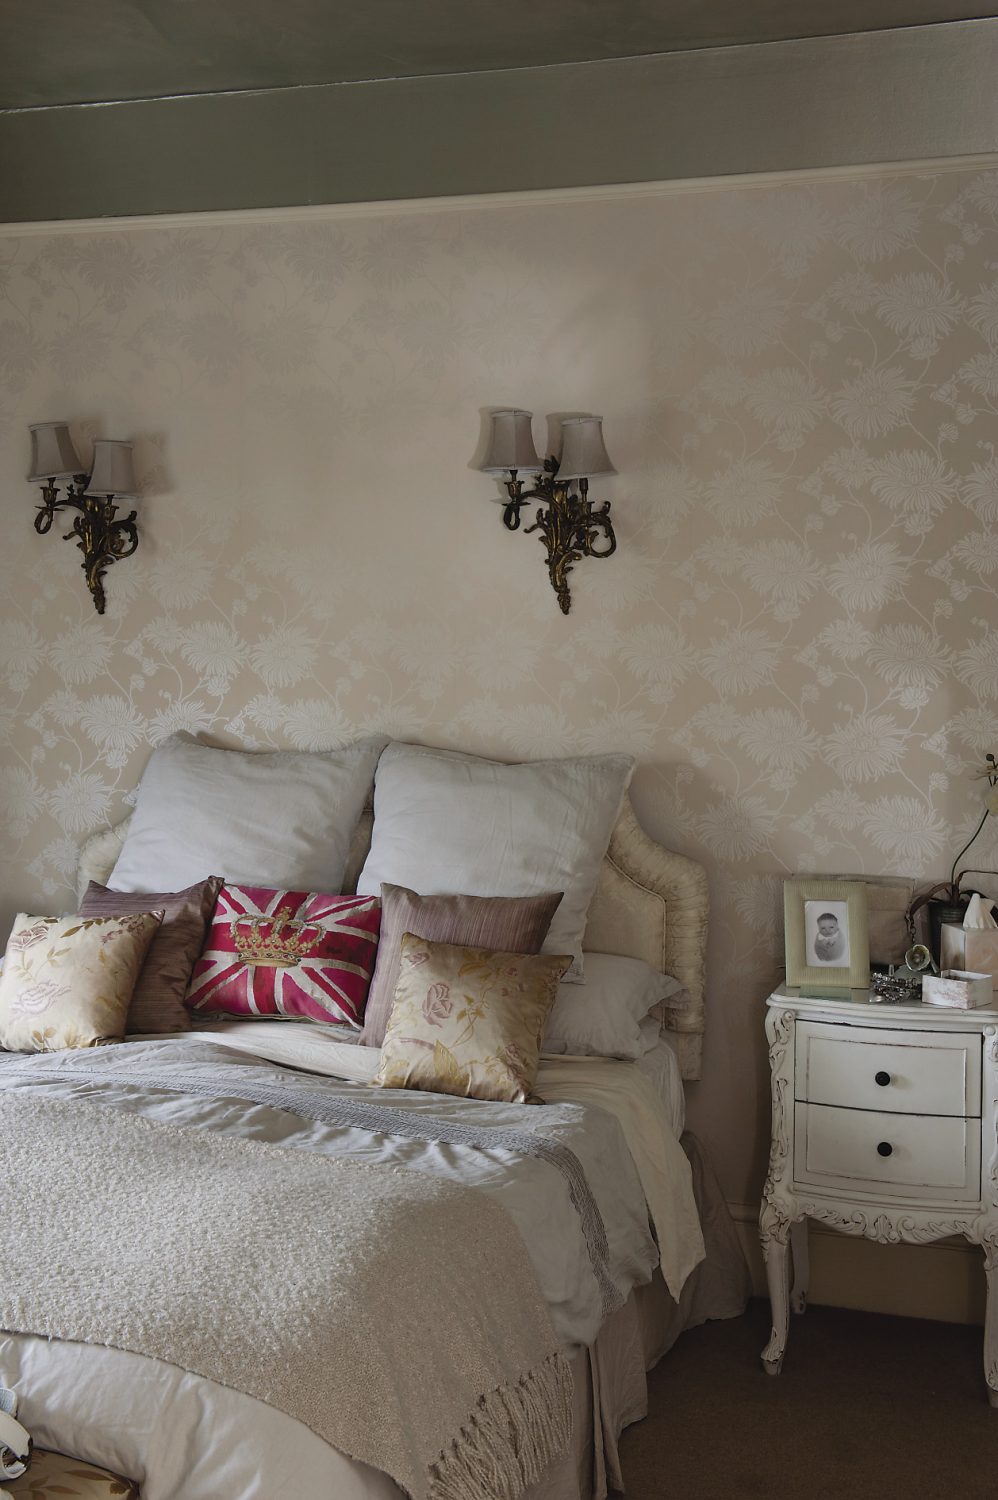 The chrysanthemum wallpaper has a subtle pearlised sheen that is echoed by the silver wash used on the ceiling. The bedlinen is a mix of fine linen and silk but in the centre of the bed is a Union Jack cushion with a crown in the centre